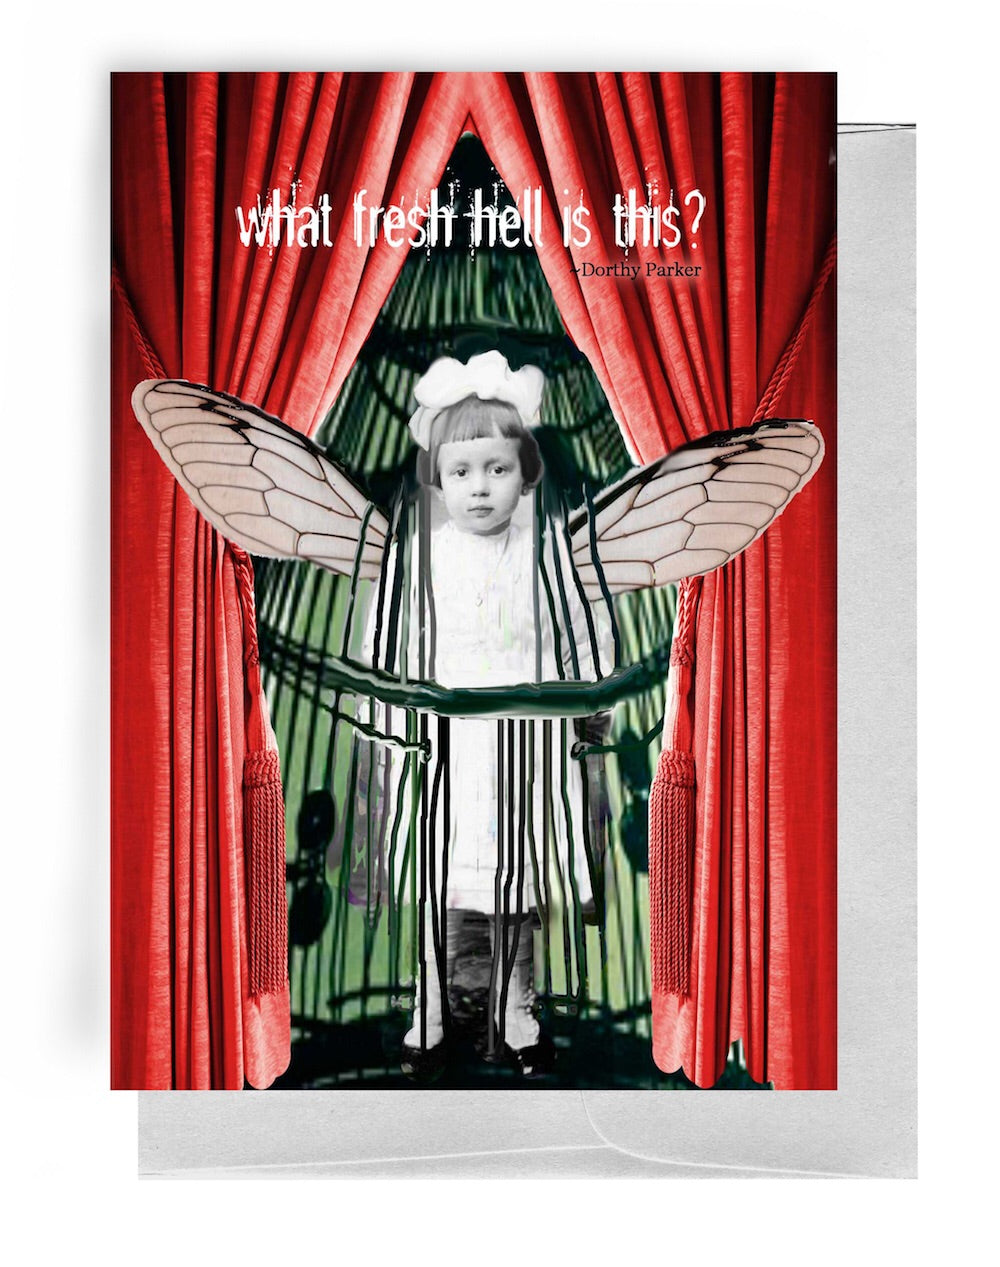 GREETING CARD, WHITE ENVELOPE. 5” BY 7” | RED, THEATER CURTAINS OPENED WITH MATCHING RED TASSELS/LIGHT GREEN BEHIND/BLACK CONE-SHAPED CAGE | YOUNG GIRL /WHITE BOW IN ‘PAGE-BOY’ CUT HAIR/WHITE DRESS, SOCKS, SHOES/WHITE, FLY-LIKE WINGS WITH BLACK VEINING | OUTSIDE: “WHAT FRESH HELL IS THIS?” –DORTHY PARKER/INSIDE: BLANK.